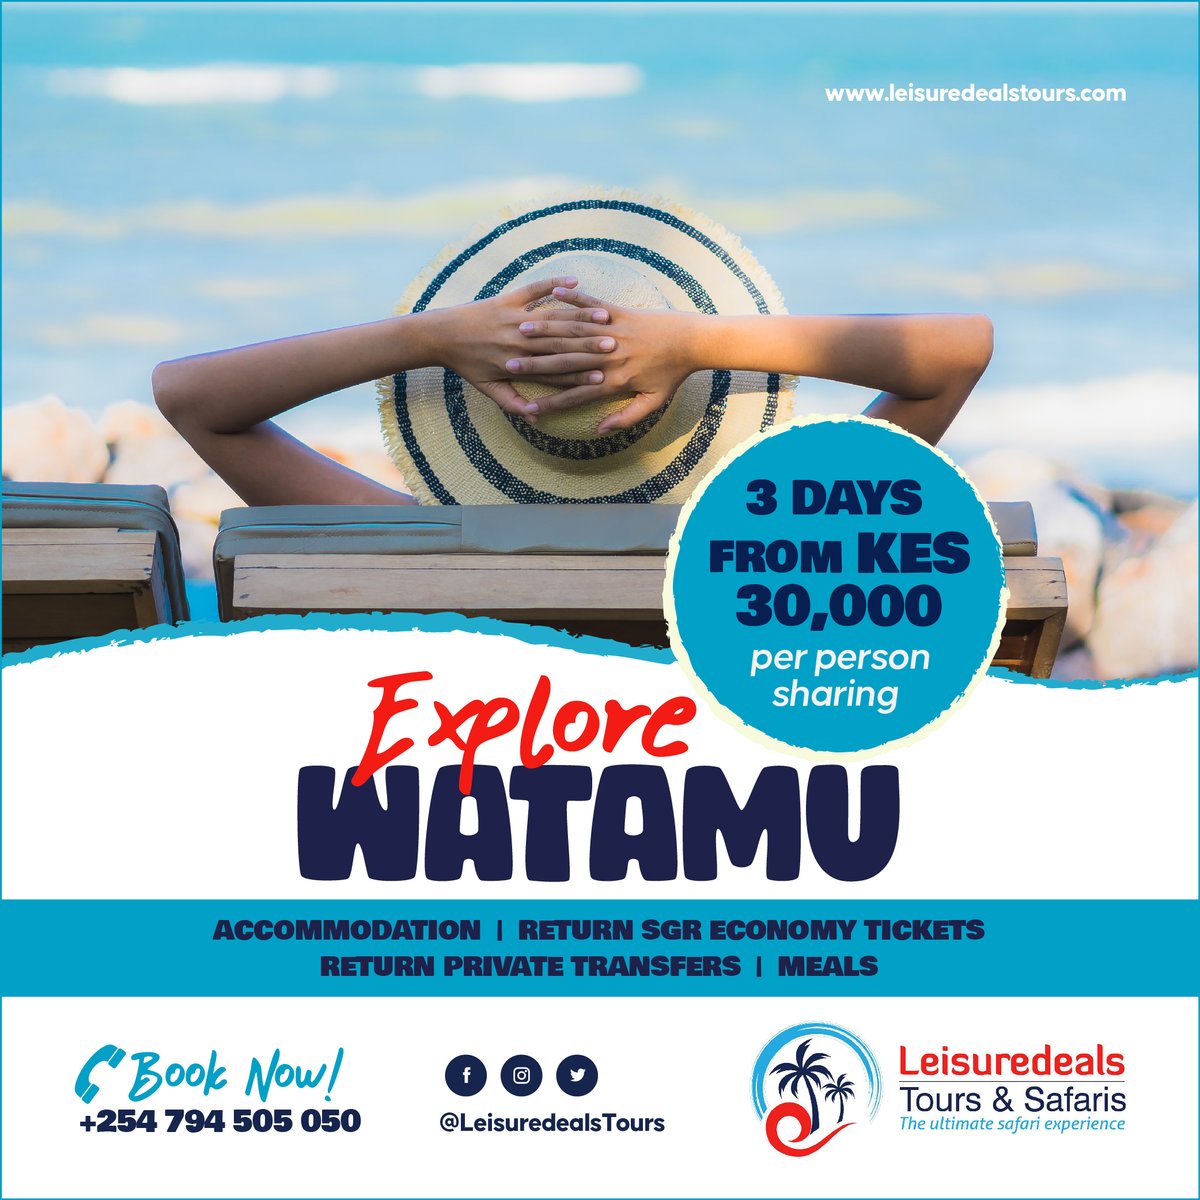 Dive into Watamu's beauty without breaking the bank! 🐠🏖️ Starting from just Ksh 30,000/-, our affordable deals ensure a memorable beach getaway. Book now! #WatamuEscape #AffordableDeals #LeisuredealsTours #TravelGoals #BeachVacation 🌅#AD